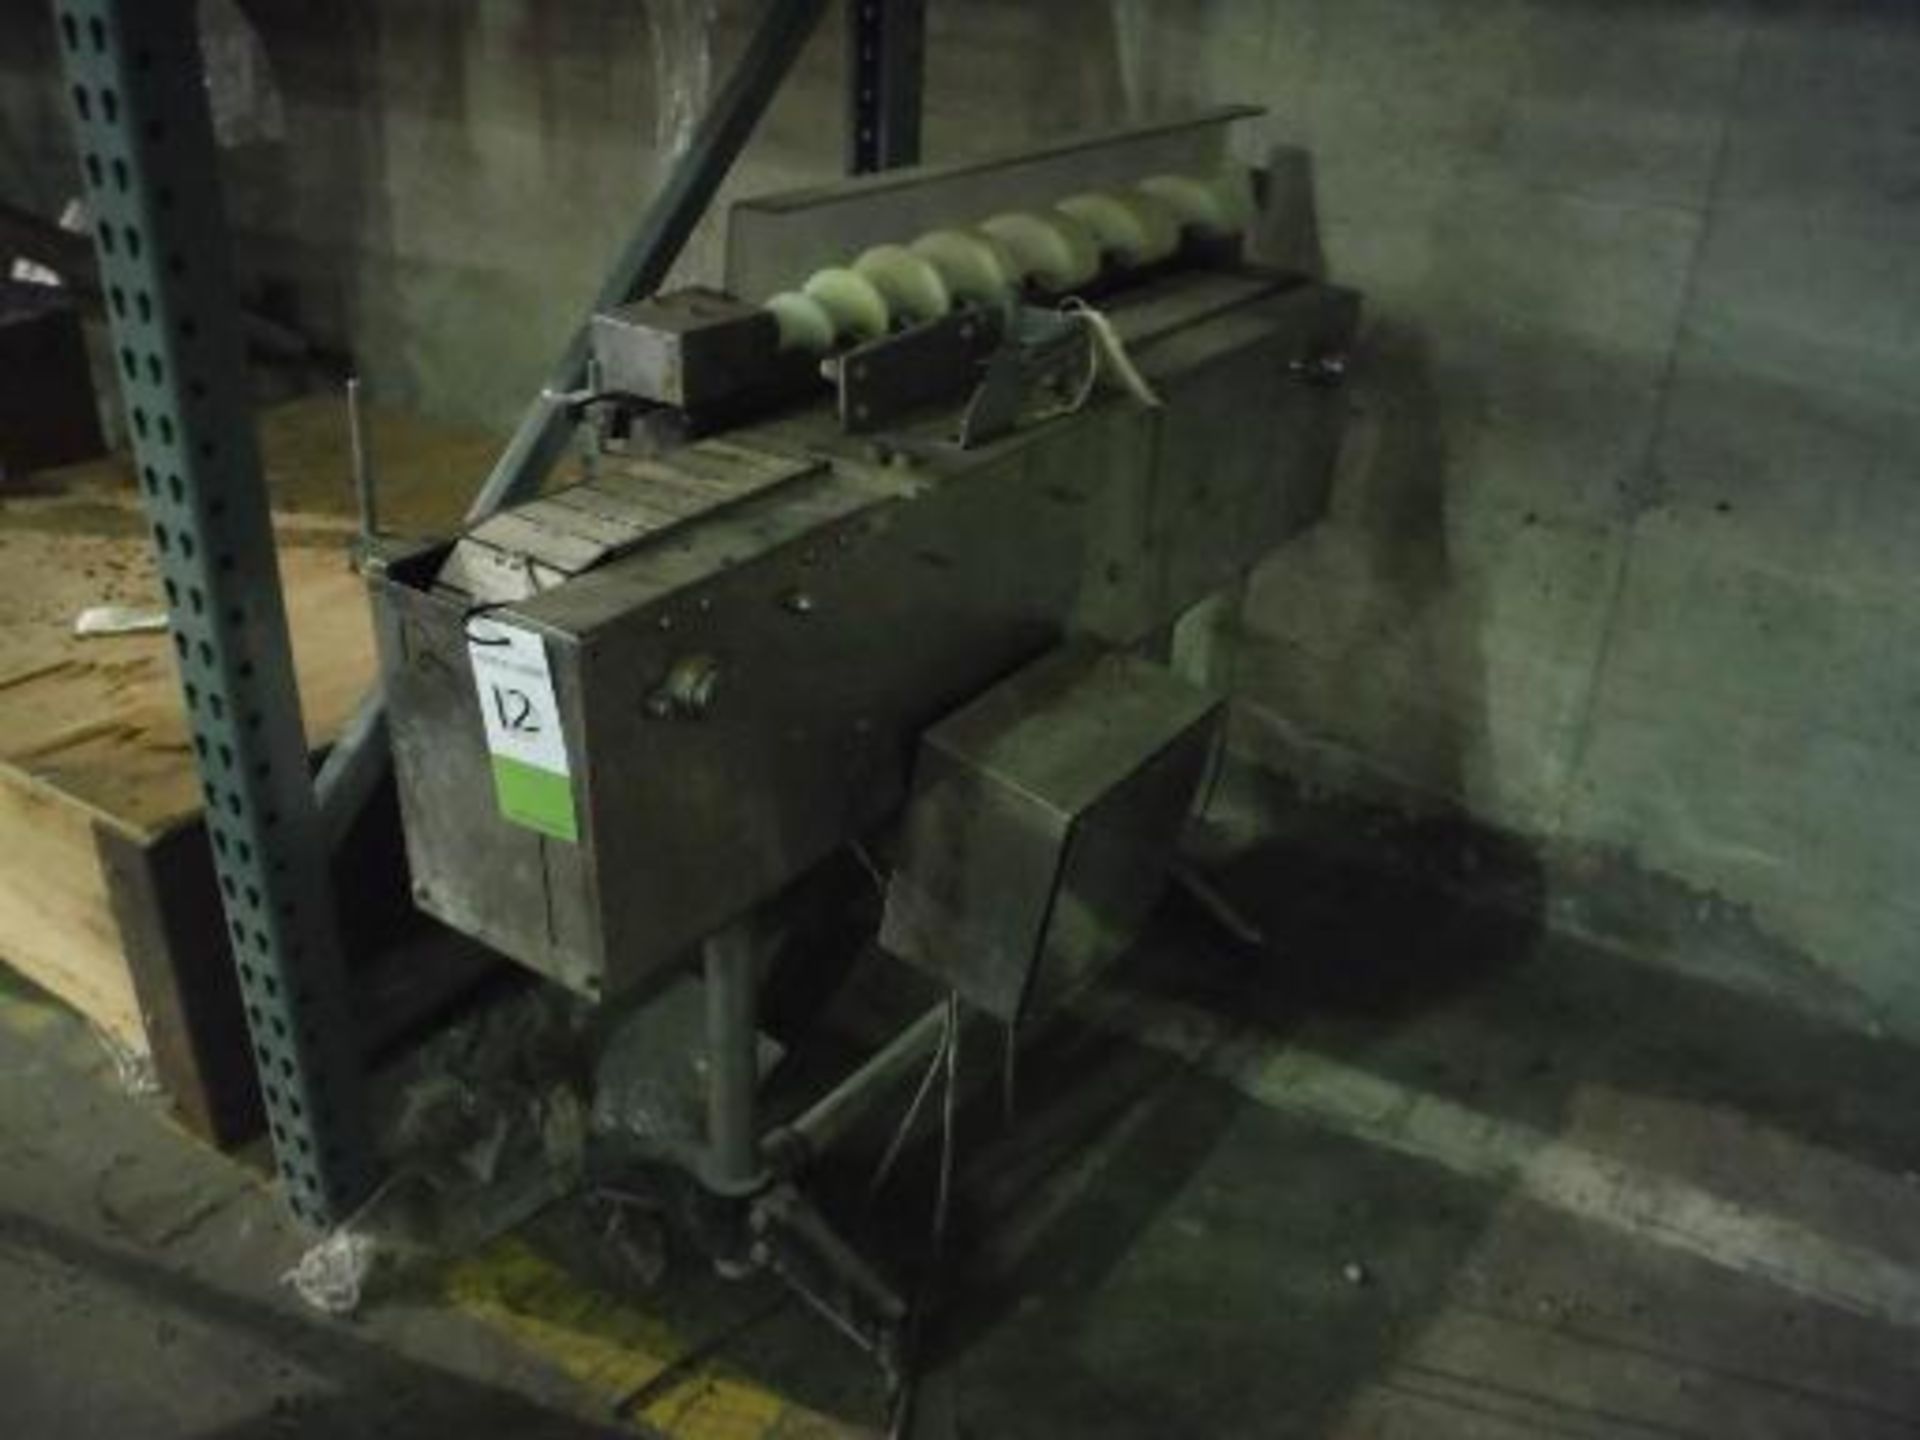 Can Indexer Conveyor, 4ft long x 4 1/2in wide (ET-25932) Located In Farmers Branch, Texas (